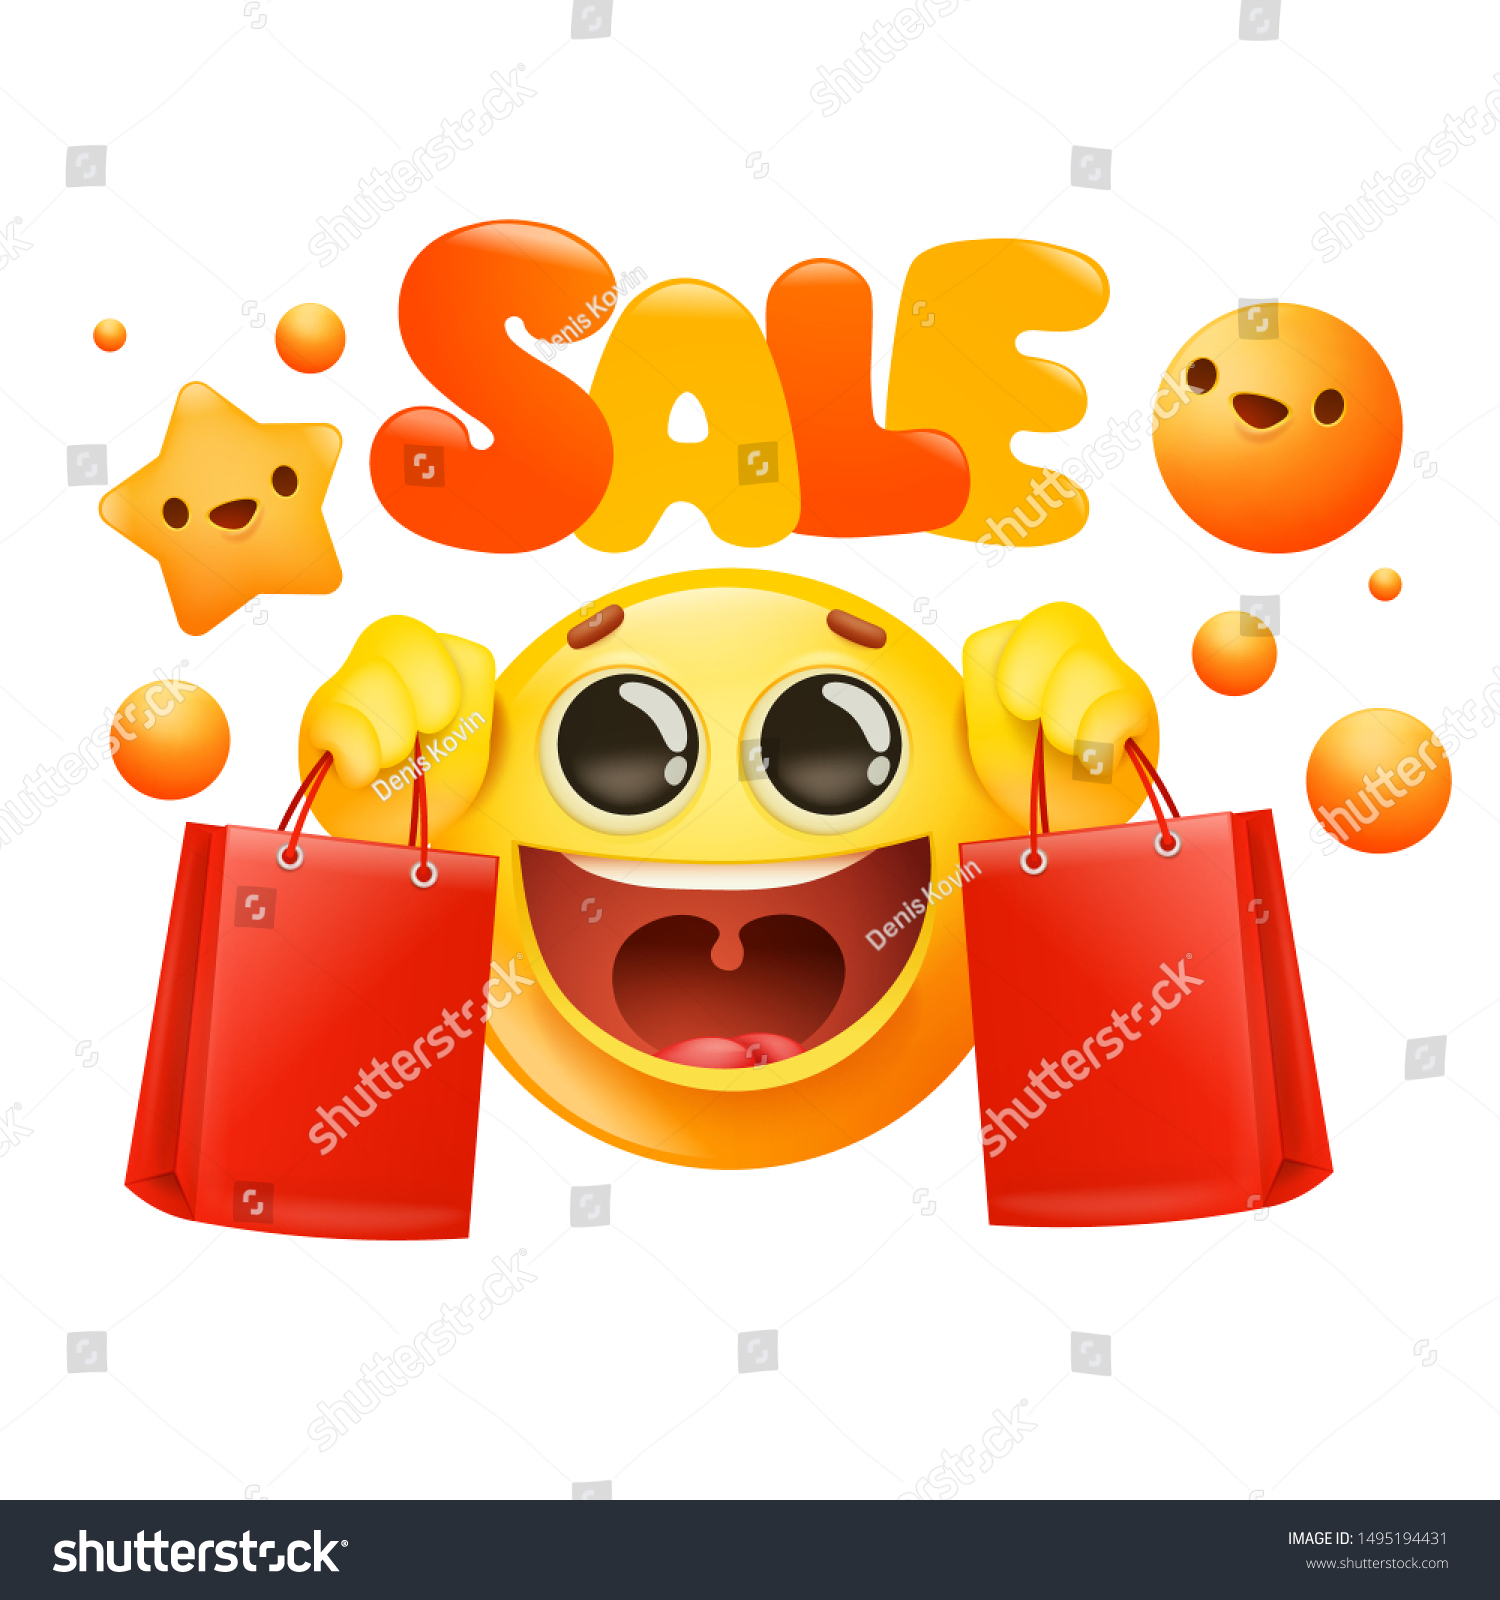 SVG of Yellow cartoon emoji character with bag in hands. Internet shopping concept card. Vector illustration svg